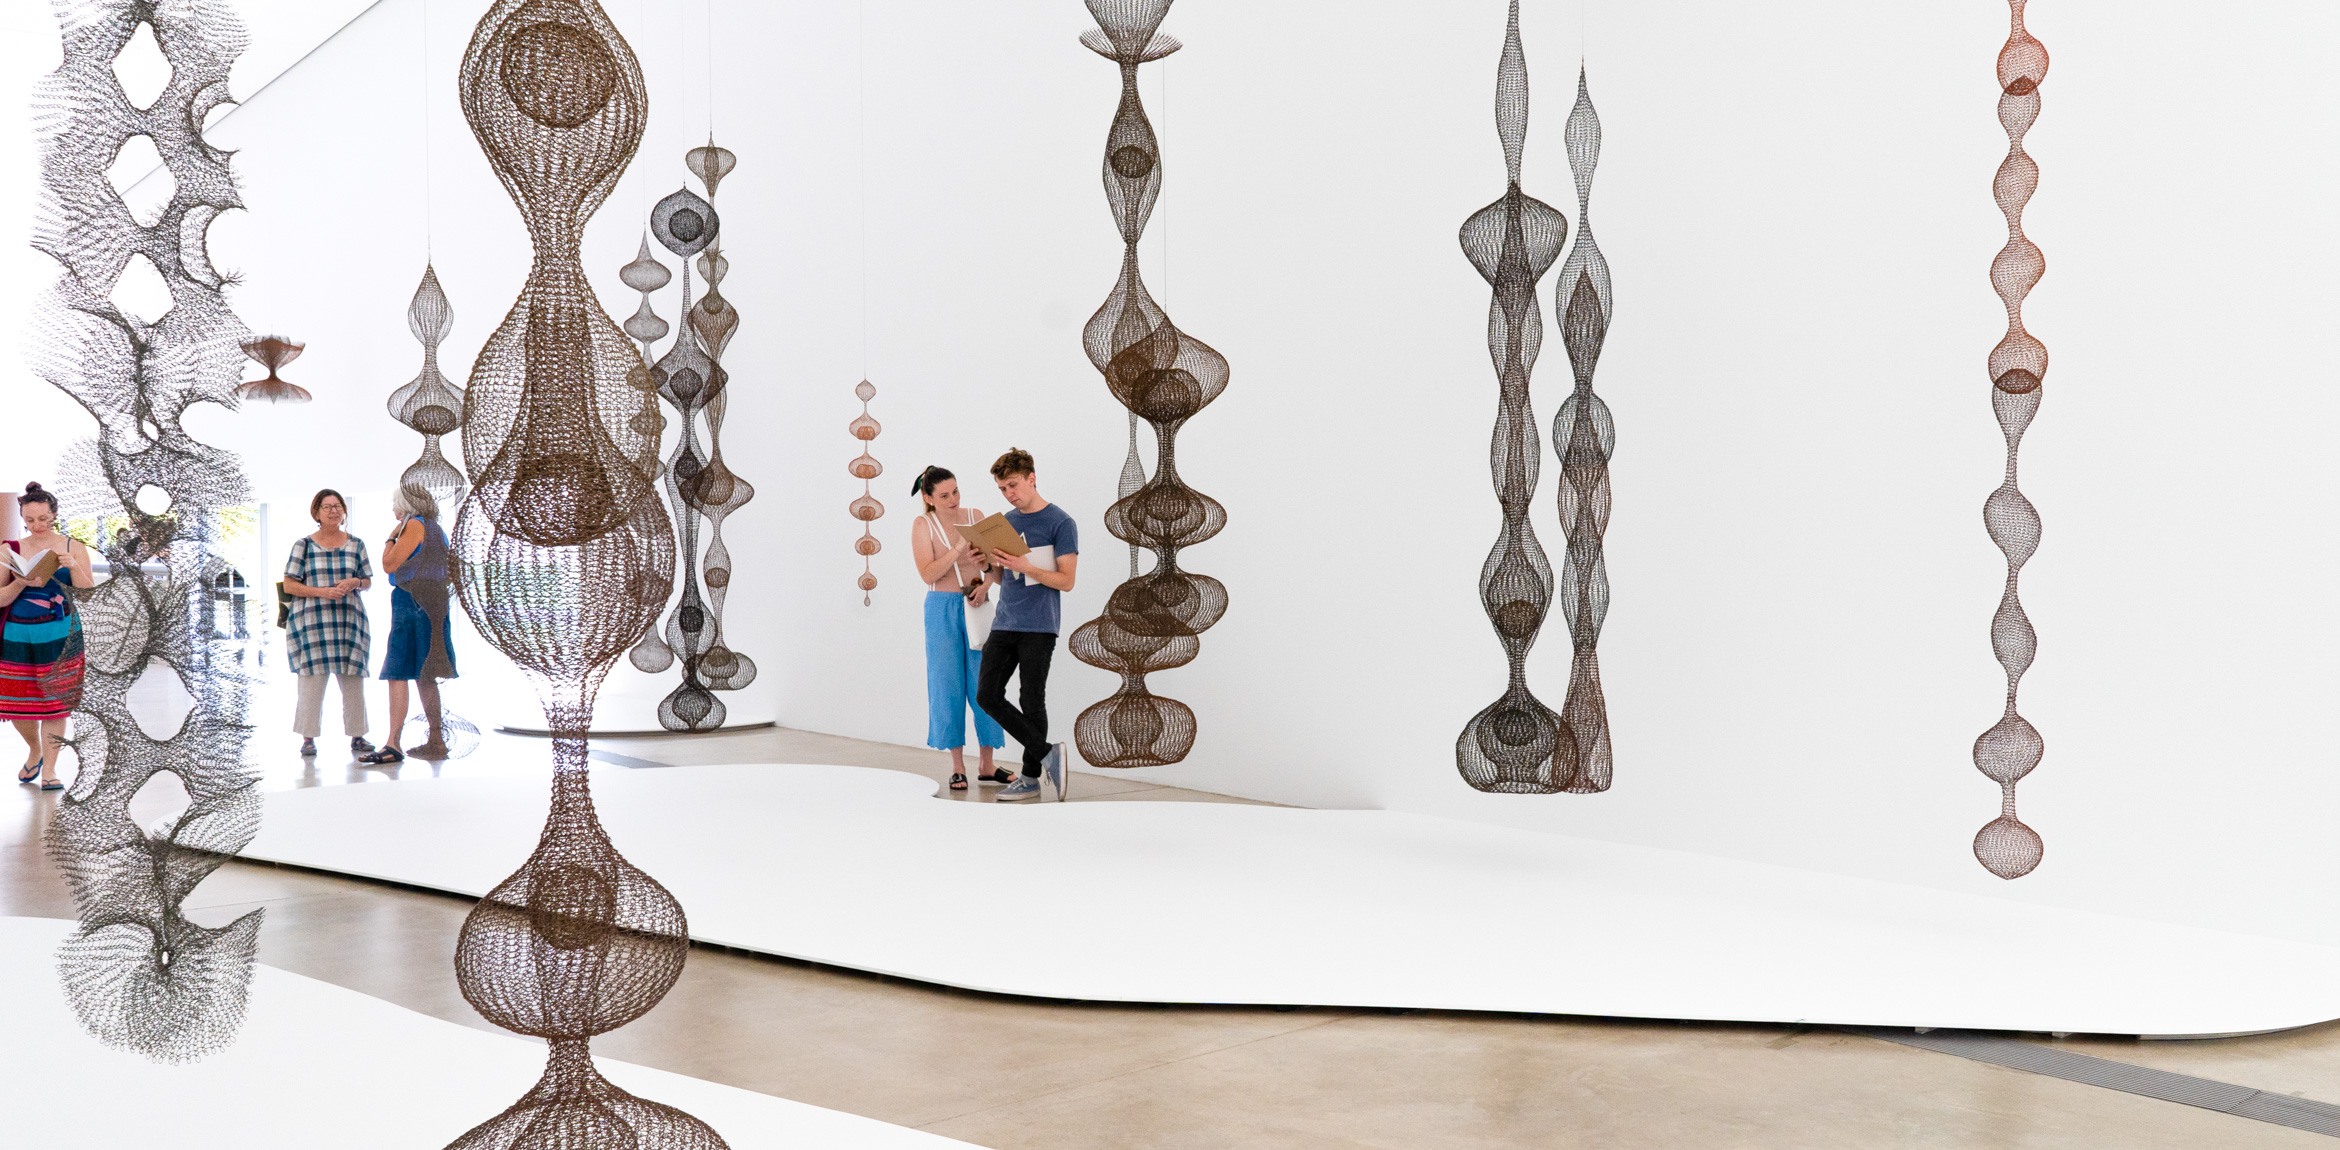 Visitors stand amid Ruth Asawa's hanging wire sculptures in the Main Gallery.